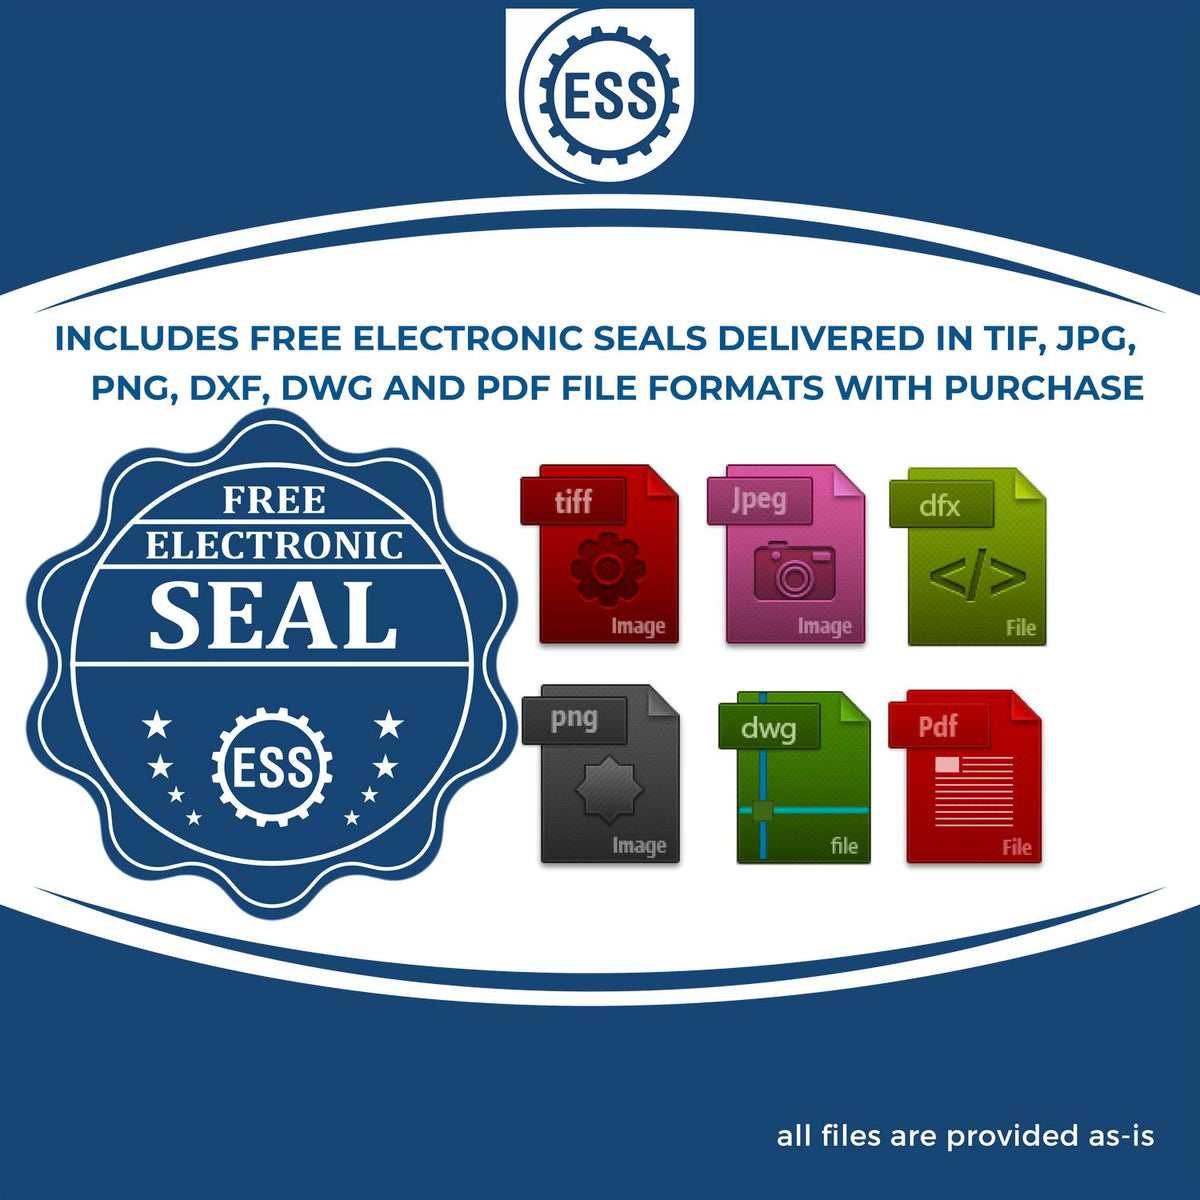 An infographic for the free electronic seal for the Wooden Handle New Jersey State Seal Notary Public Stamp illustrating the different file type icons such as DXF, DWG, TIF, JPG and PNG.